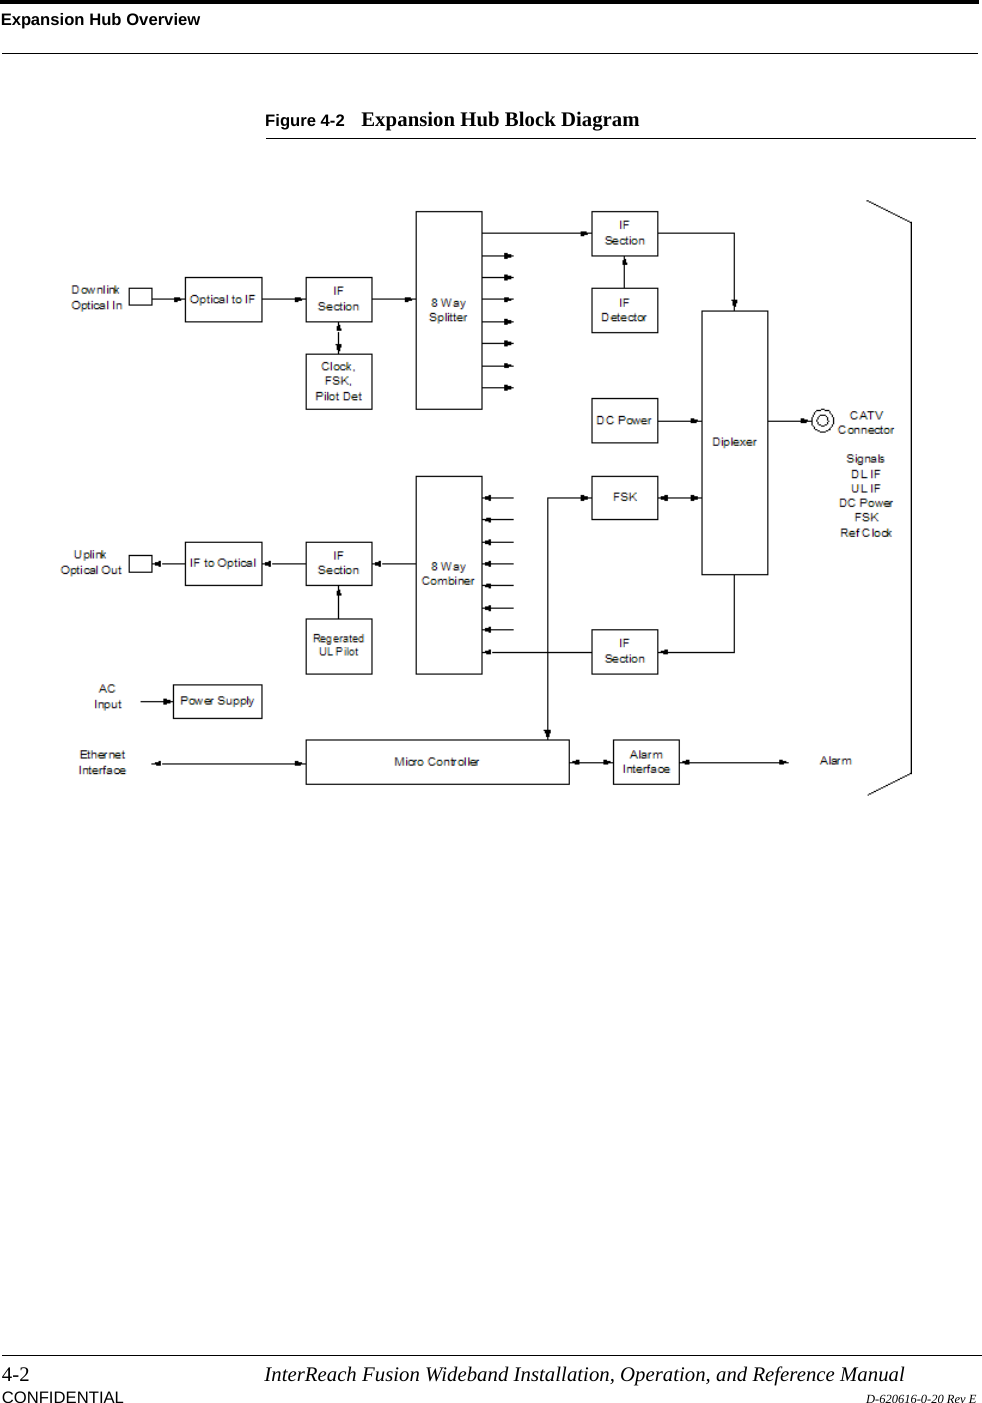 Expansion Hub Overview4-2 InterReach Fusion Wideband Installation, Operation, and Reference ManualCONFIDENTIAL D-620616-0-20 Rev EFigure 4-2 Expansion Hub Block Diagram